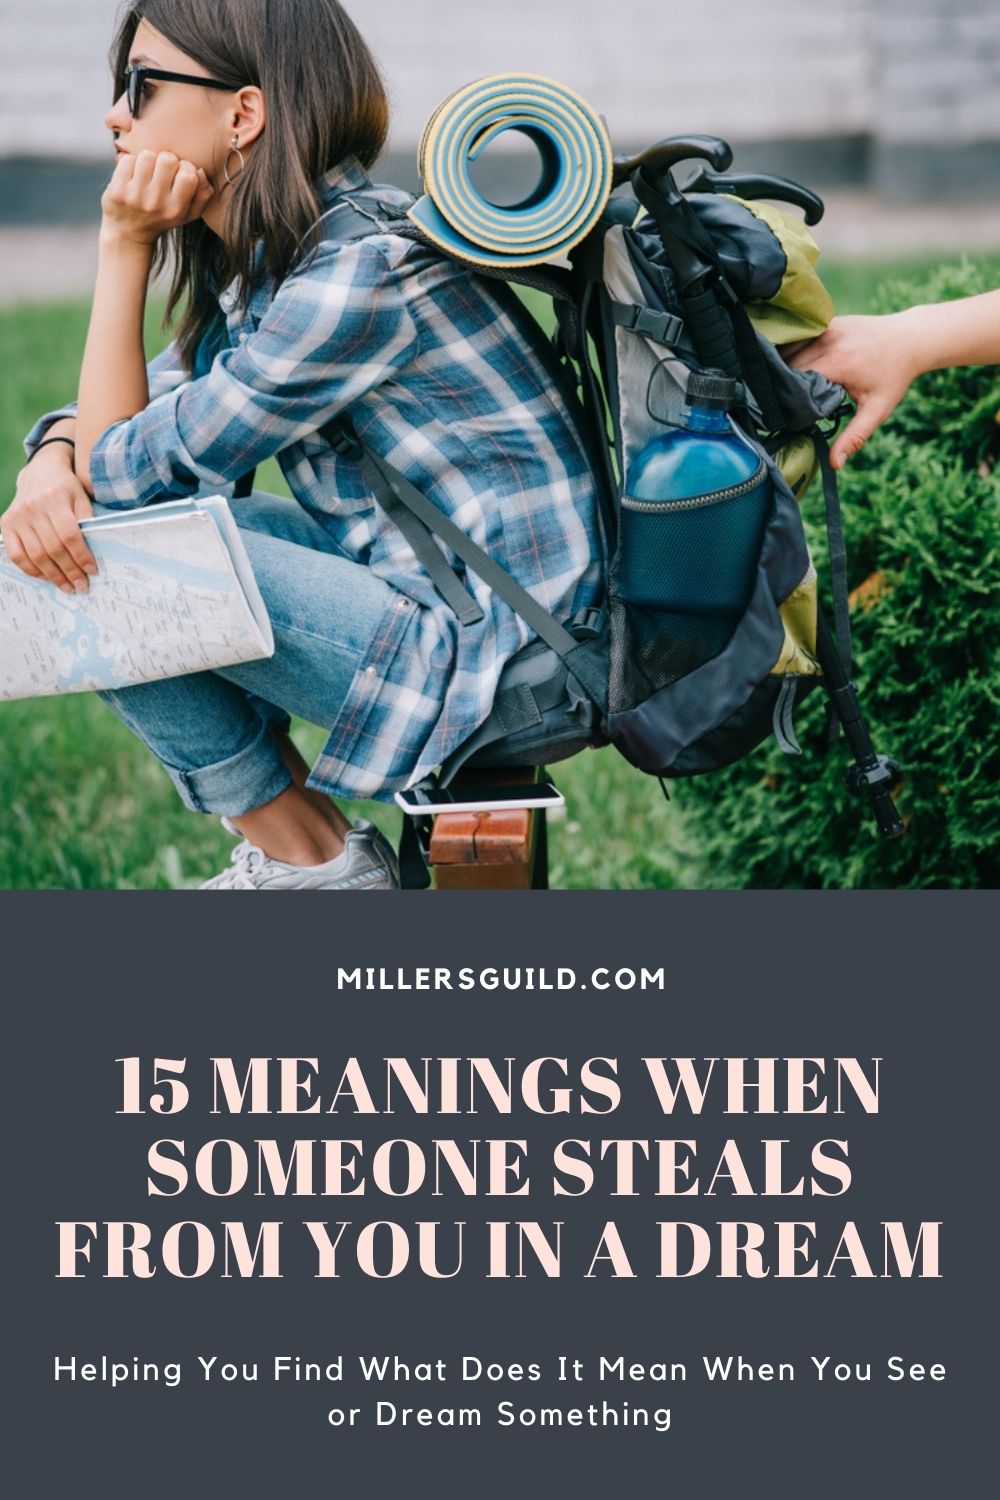 15 Meanings When Someone Steals from You In a Dream 2